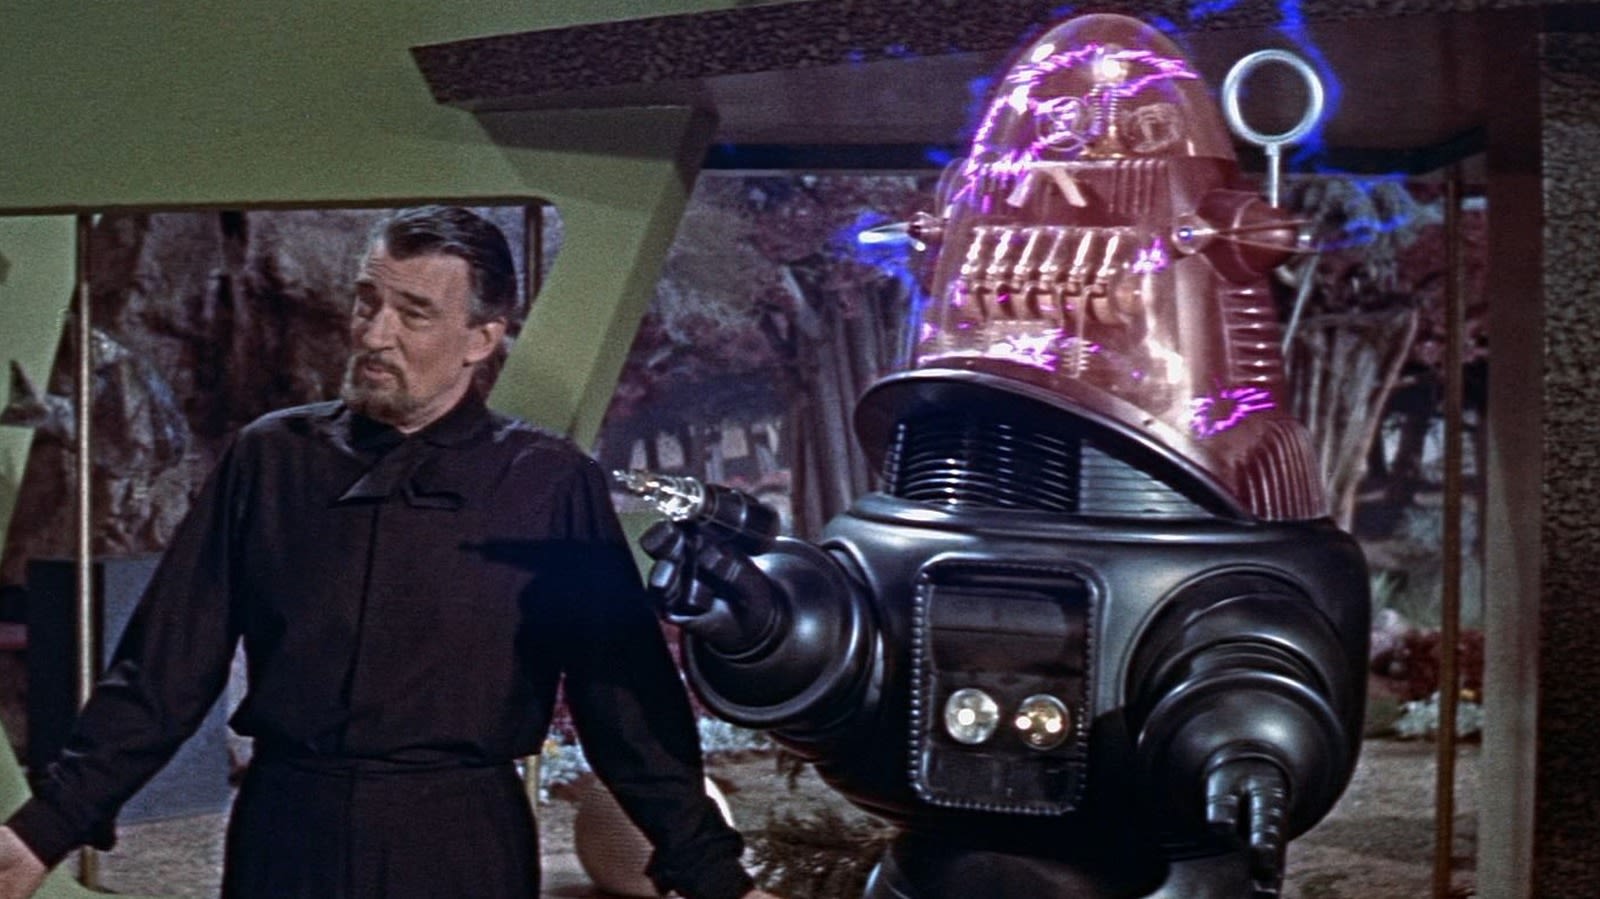 How Forbidden Planet Tricked MGM Into Funding Its Elaborate, Expensive Sci-Fi Sets - SlashFilm